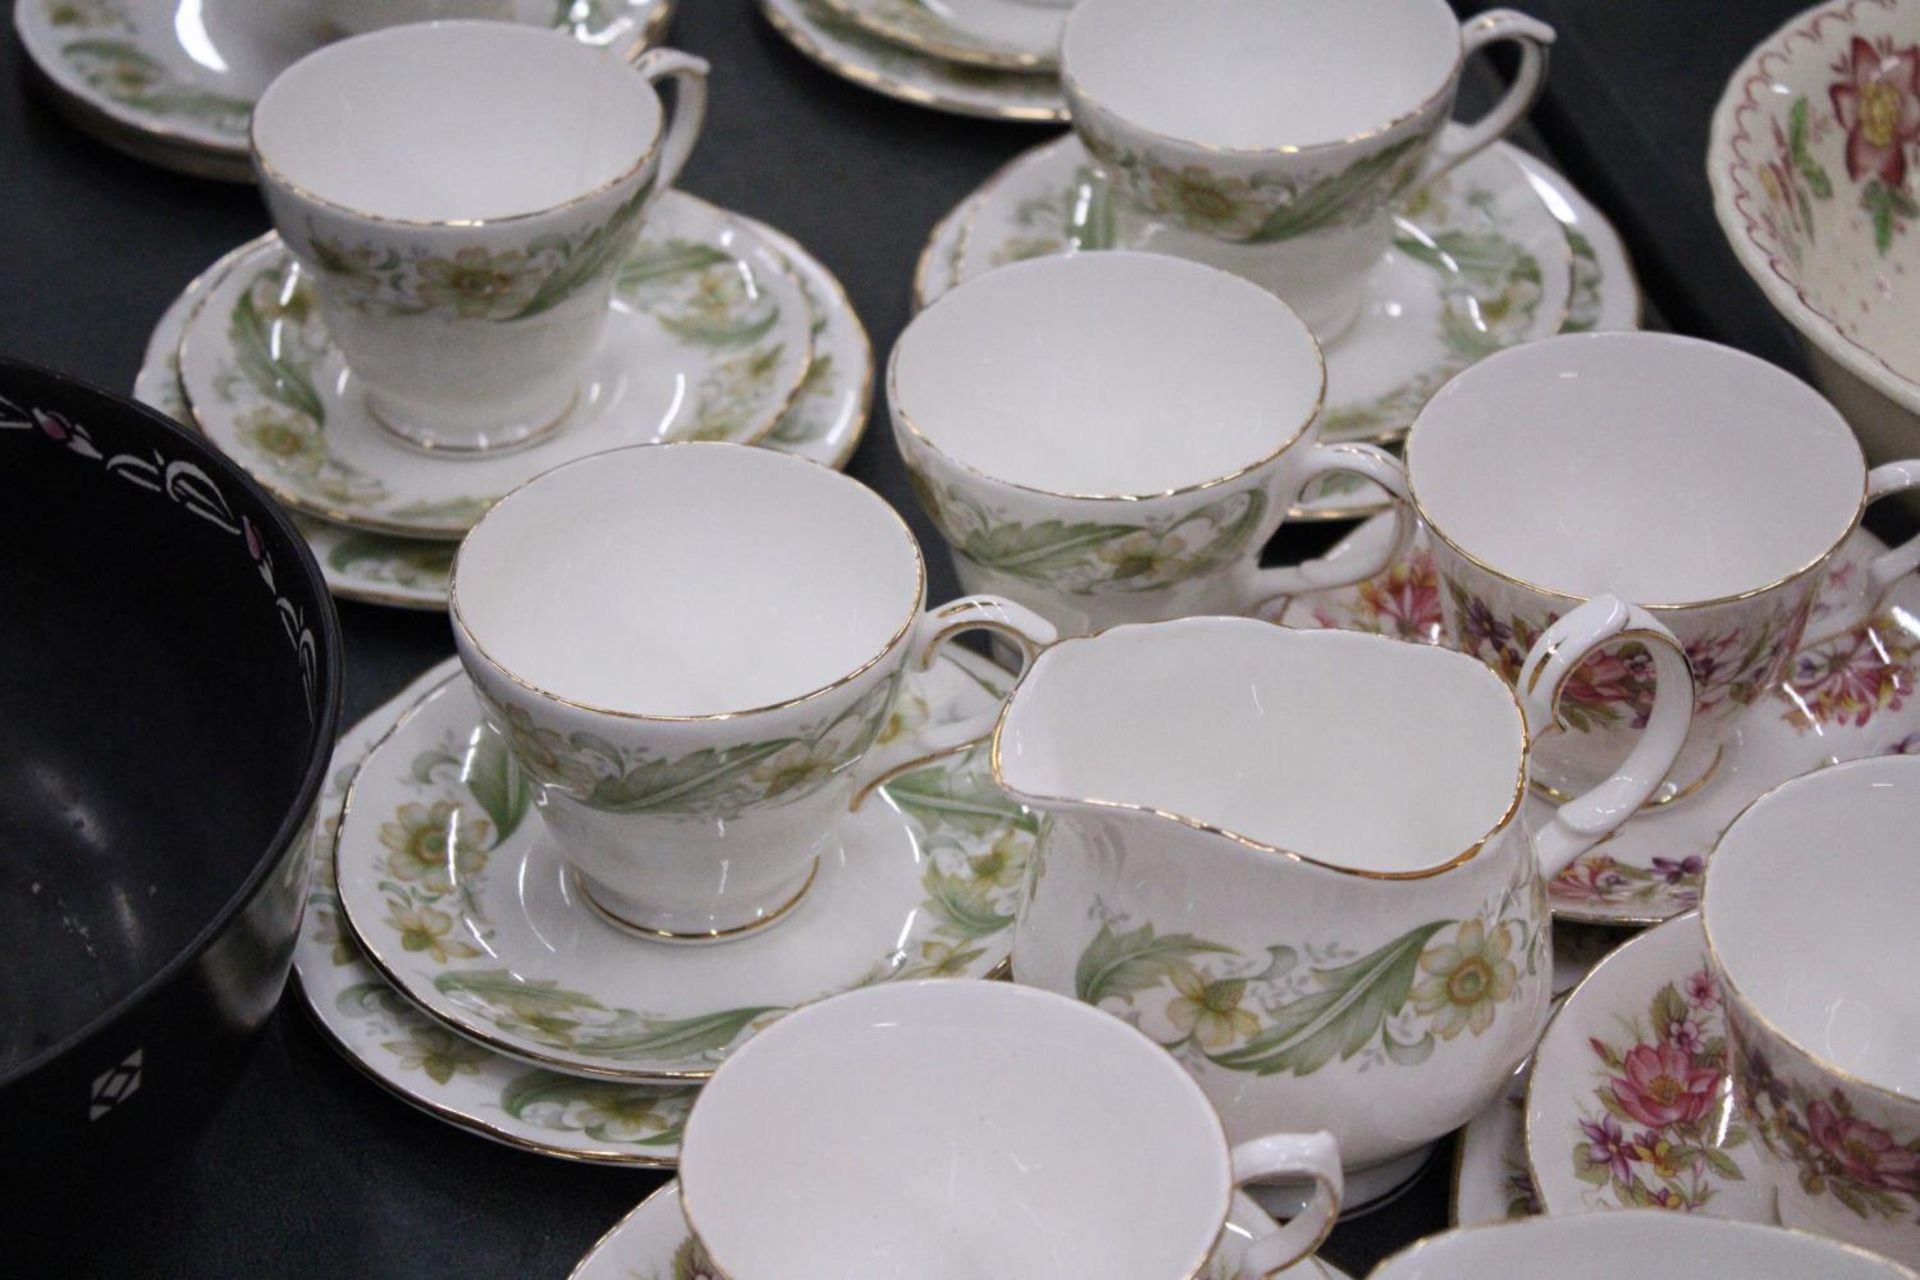 A QUANTITY OF CHINA CUPS, SAUCERS, SIDE PLATES AND CREAM JUGS BY COLCLOUGH AND DUCHESS - Image 3 of 6